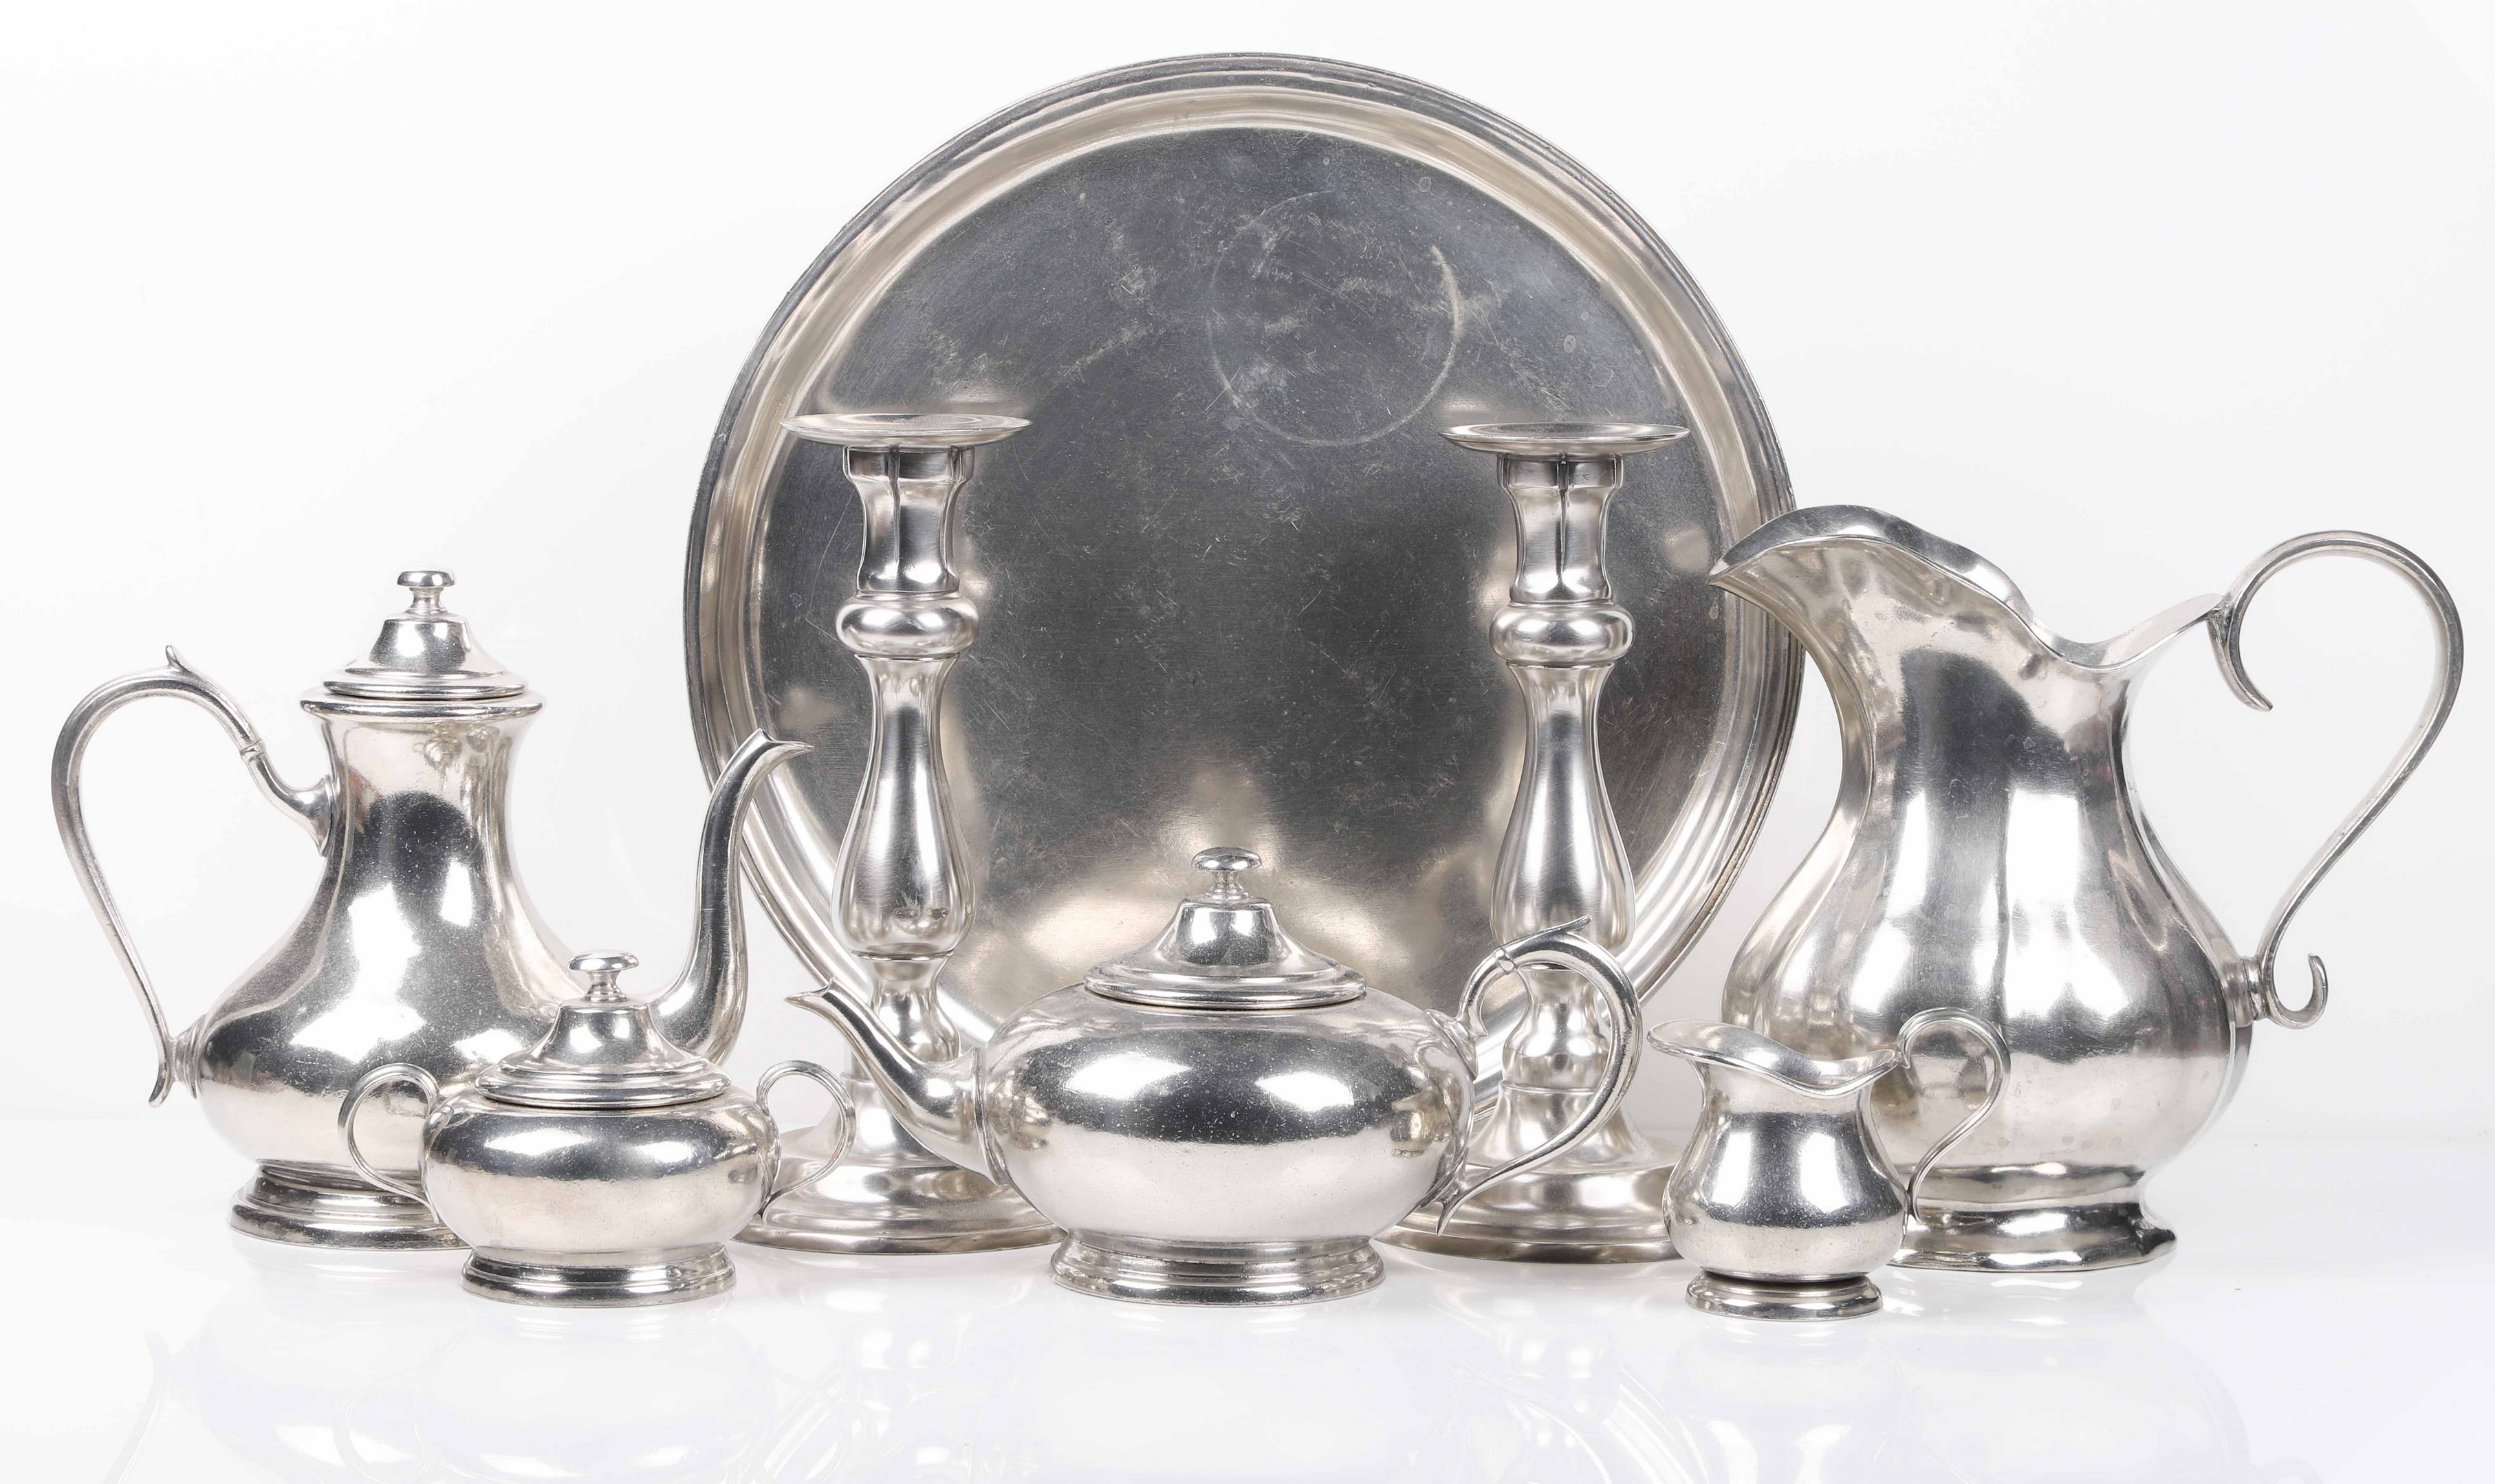 Pewter Tea Service, Water Pitcher and